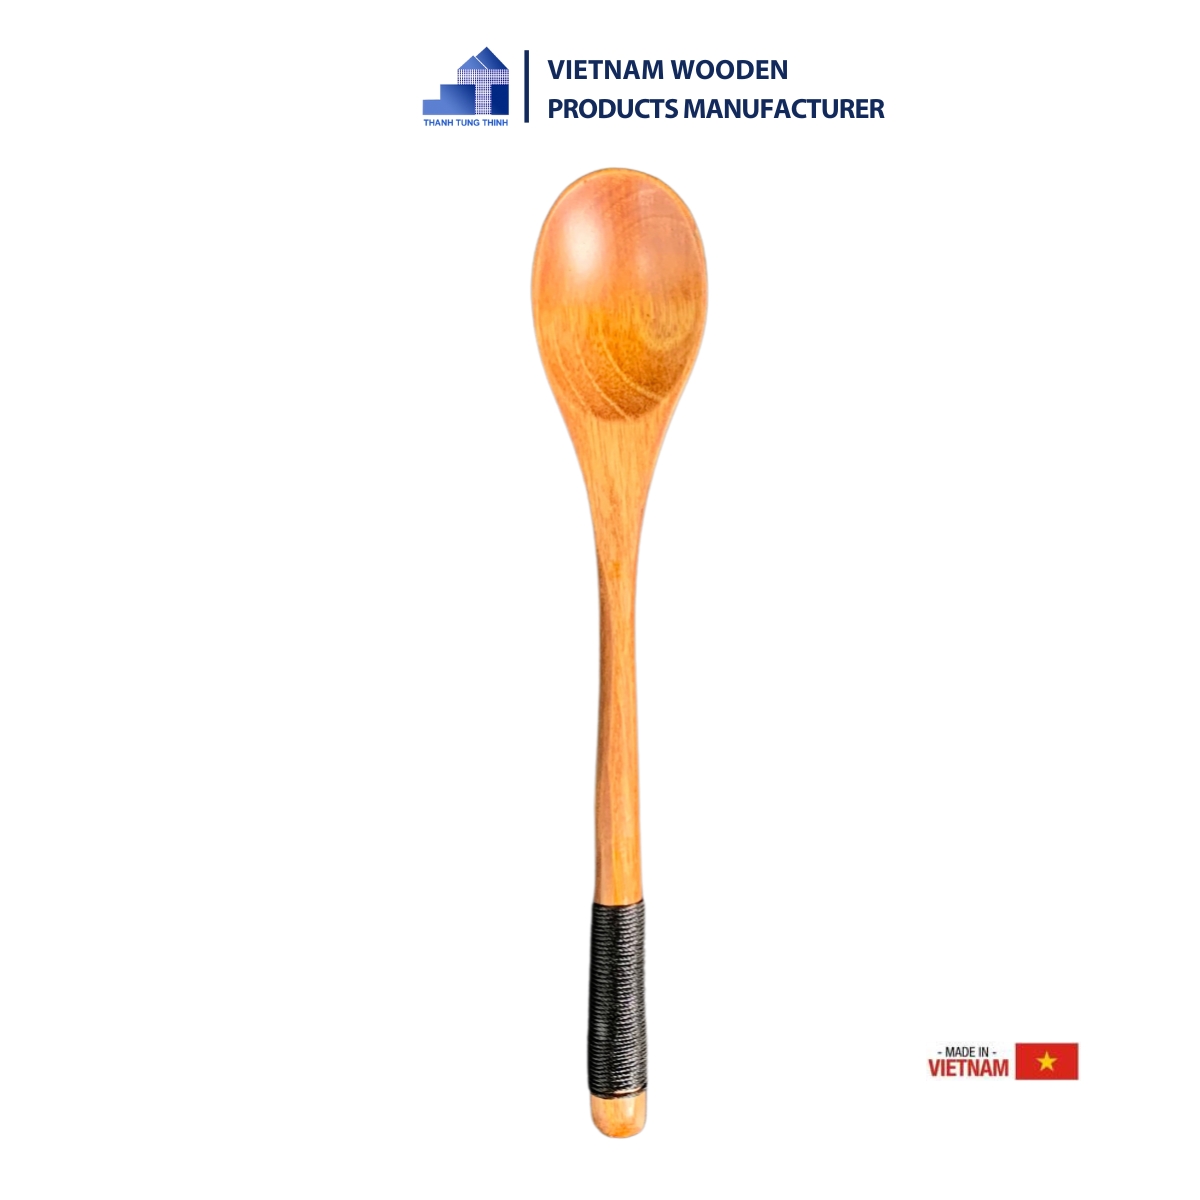 The high-end black large-sized wooden spoon with a rope handle is a beautifully designed product.